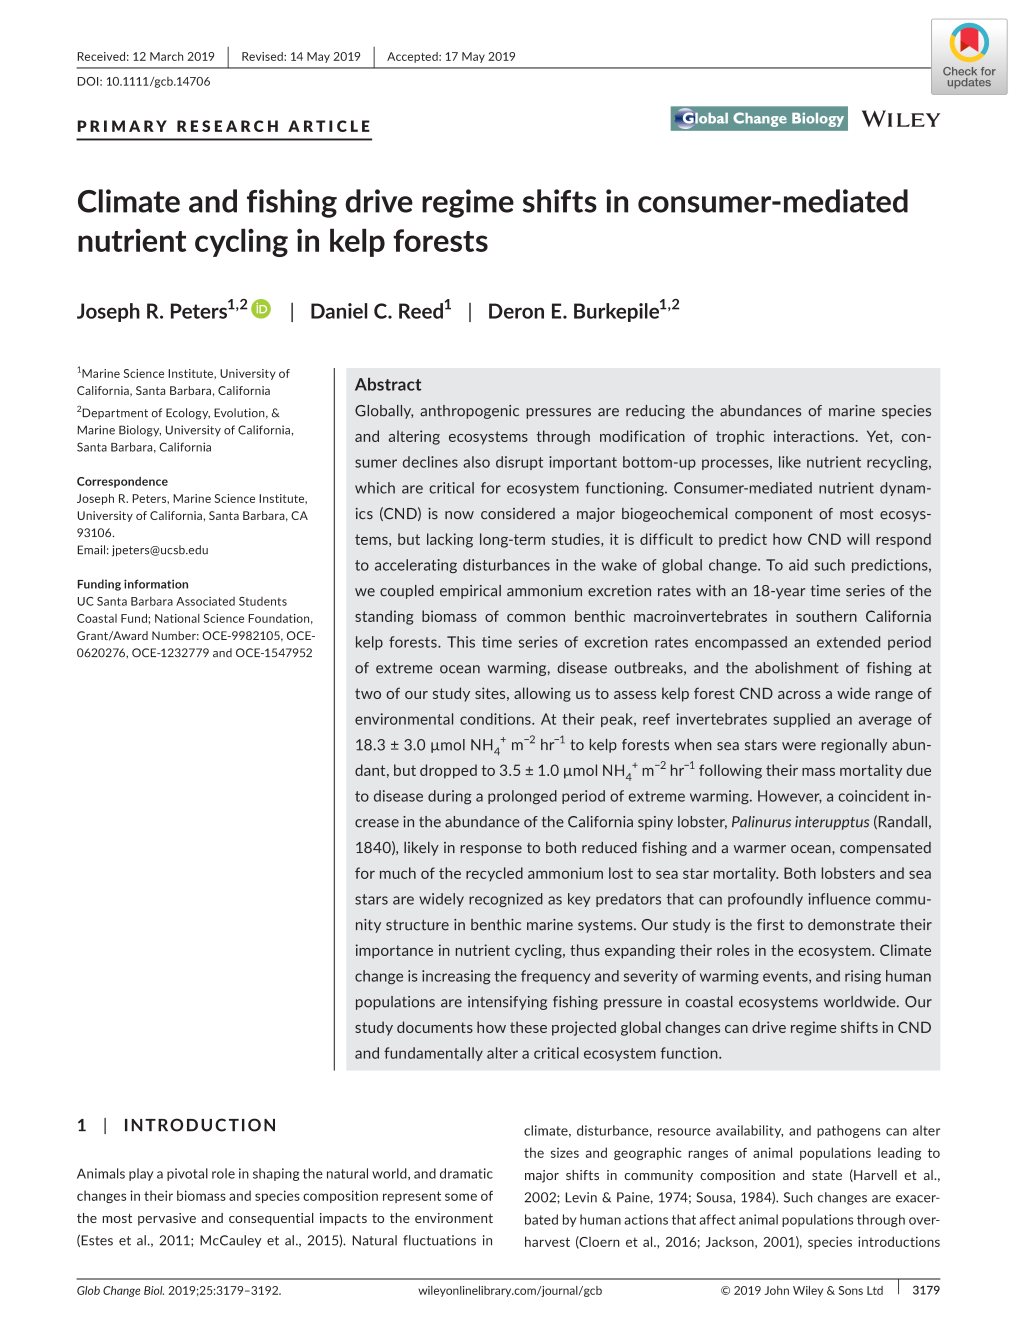 Climate and Fishing Drive Regime Shifts in Consumer-Mediated Nutrient